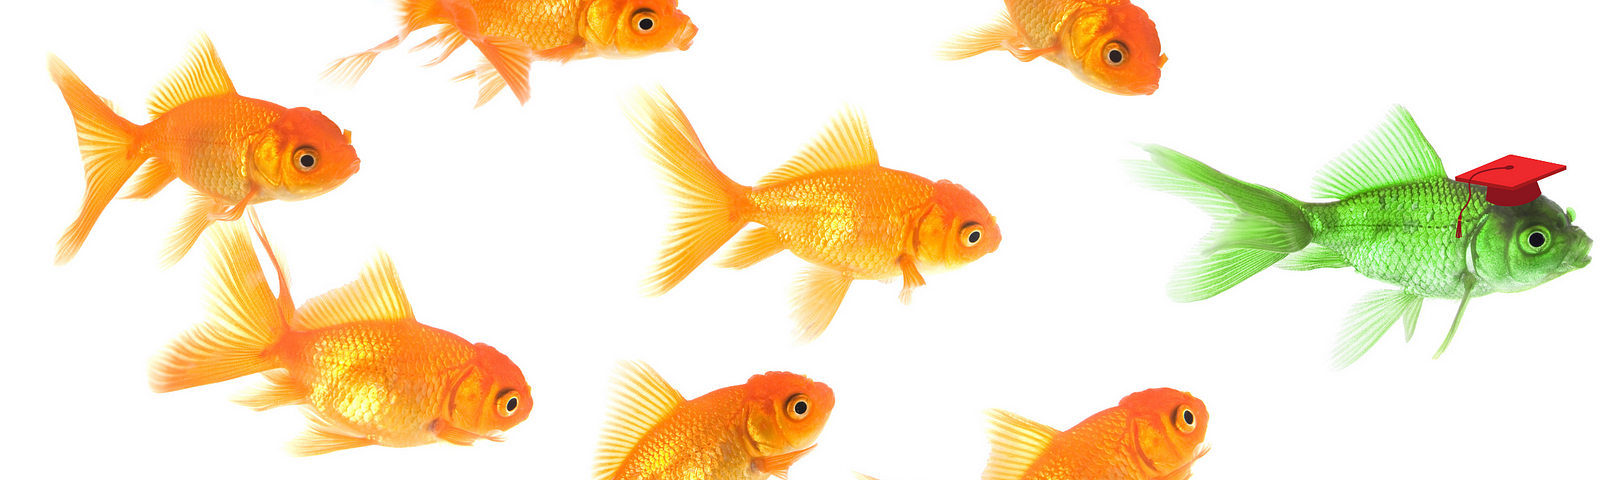 Ten goldfish following a green fish on a transparent background